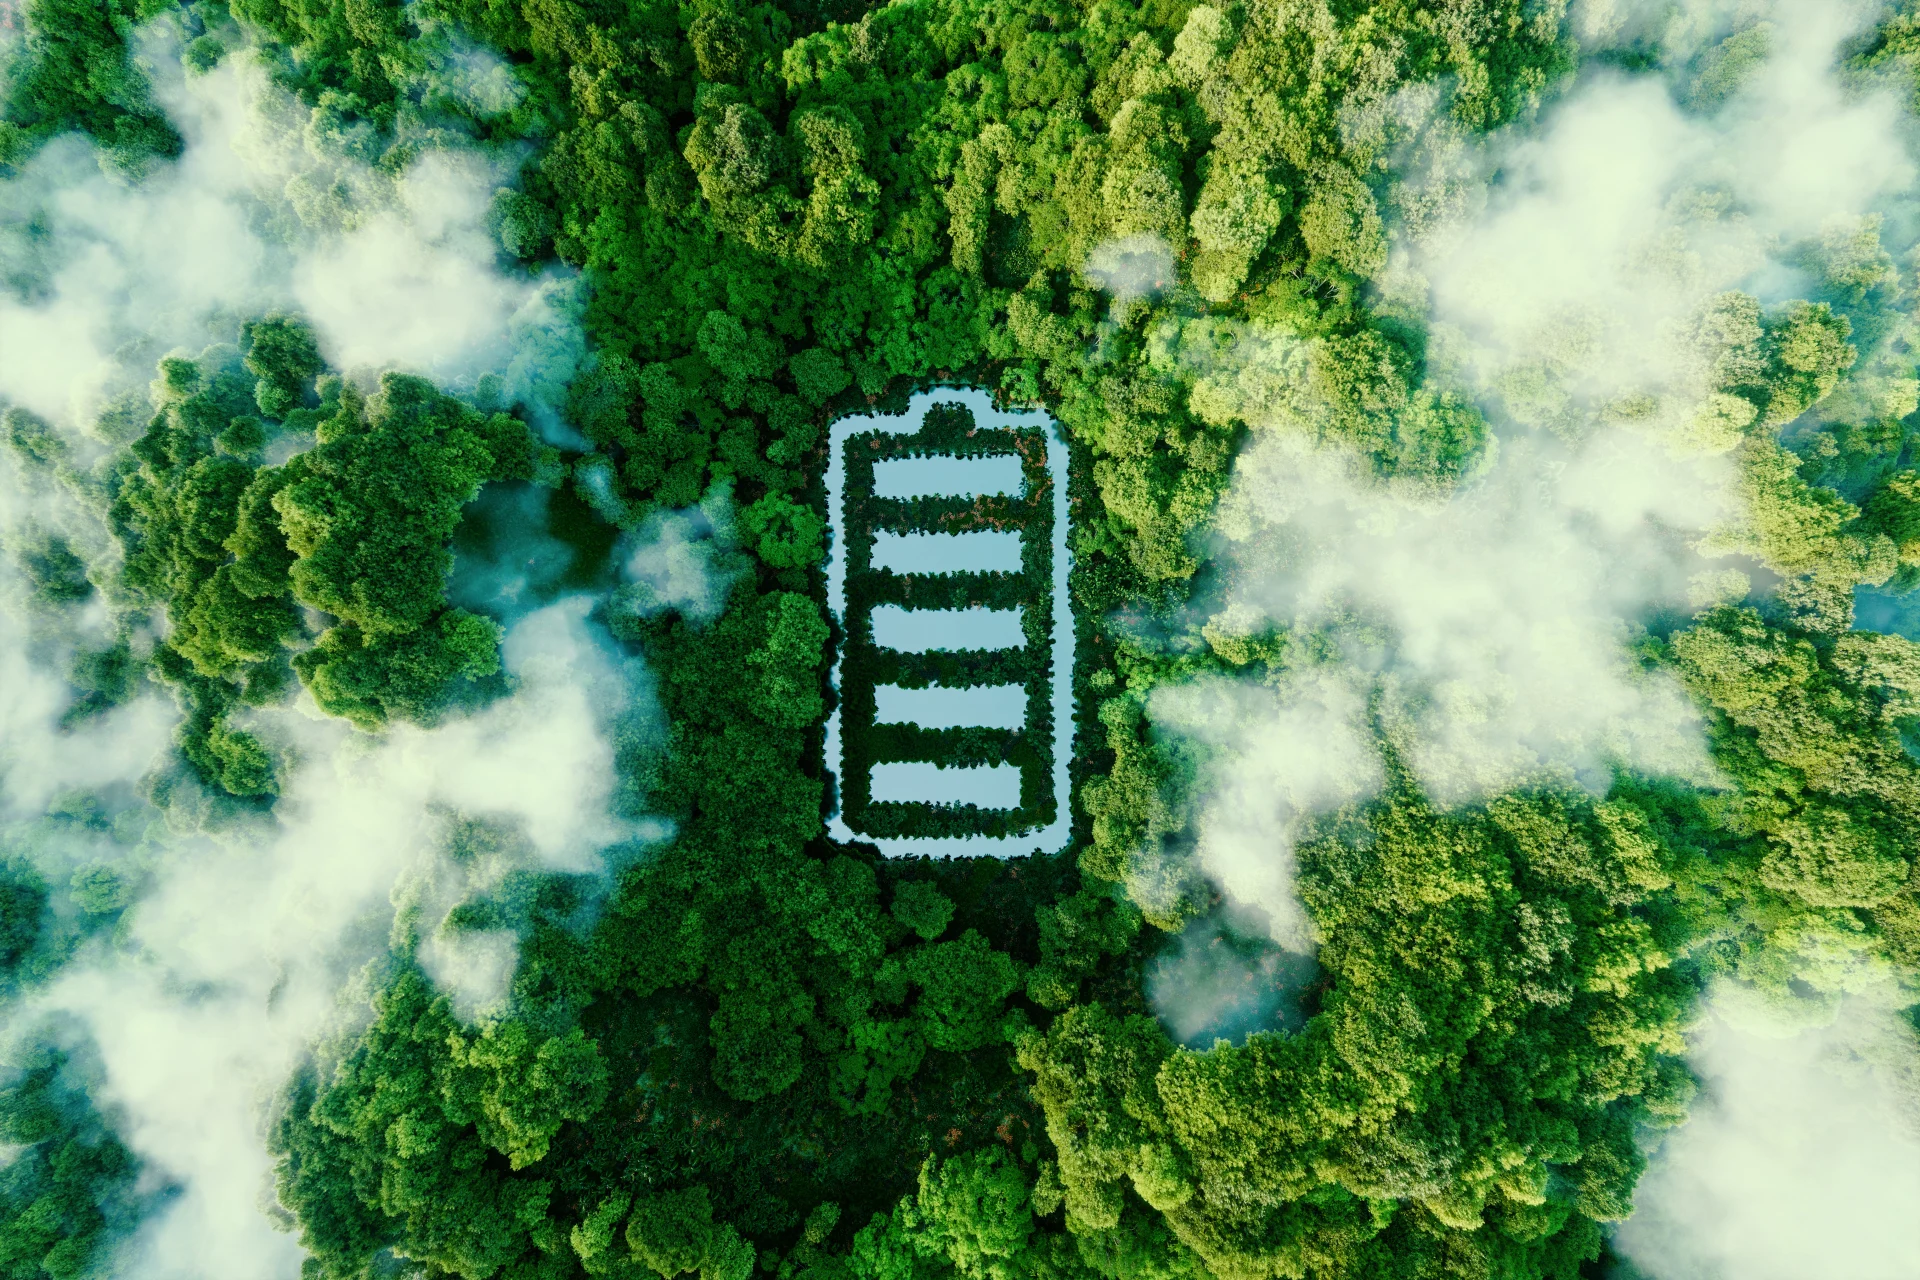 A battery-shaped pond located in a lush forest.